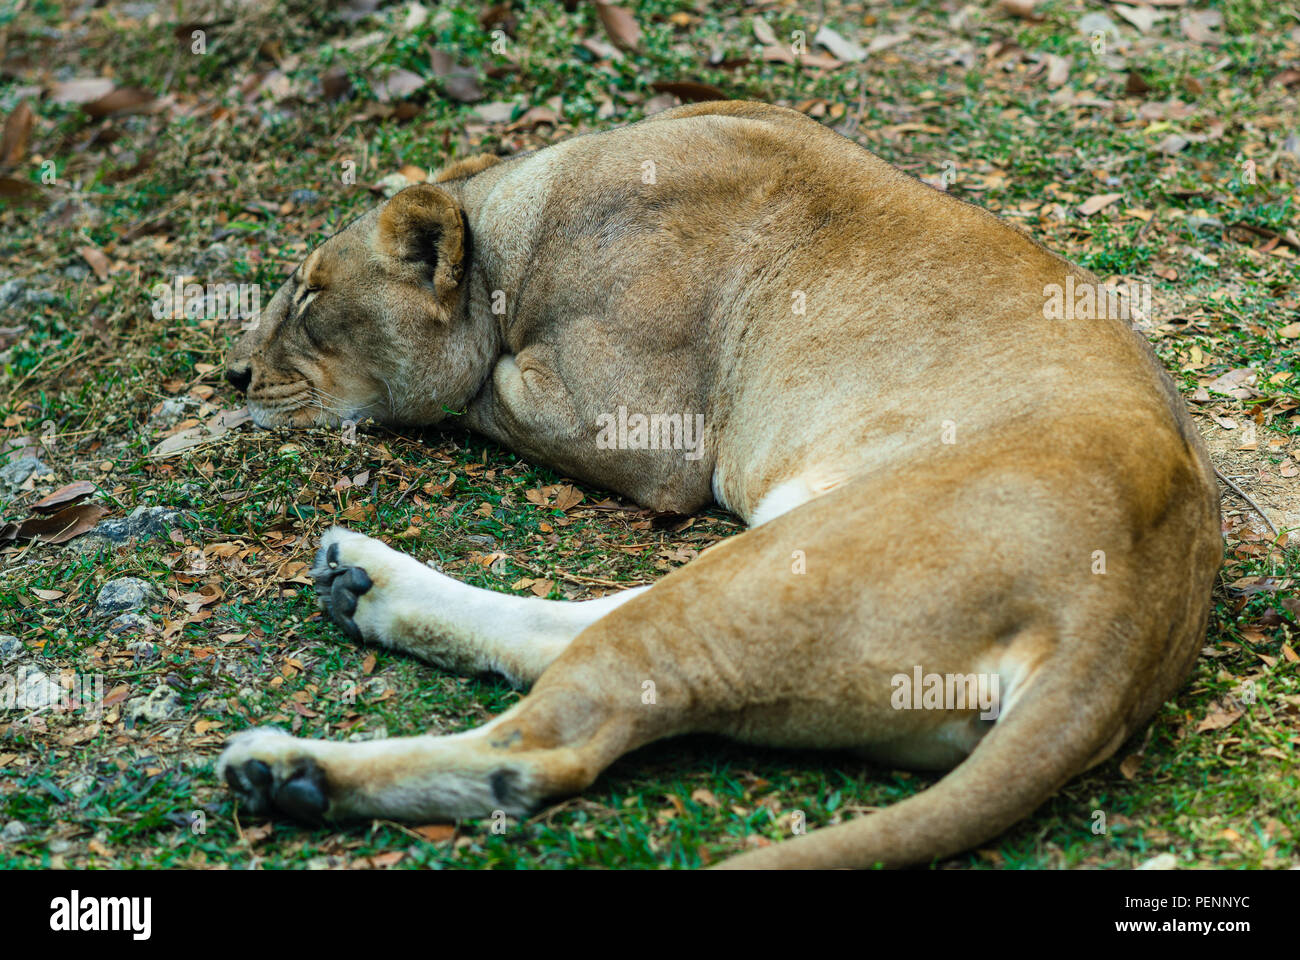 Close-up view of a lioness resting on the ground Stock Photo